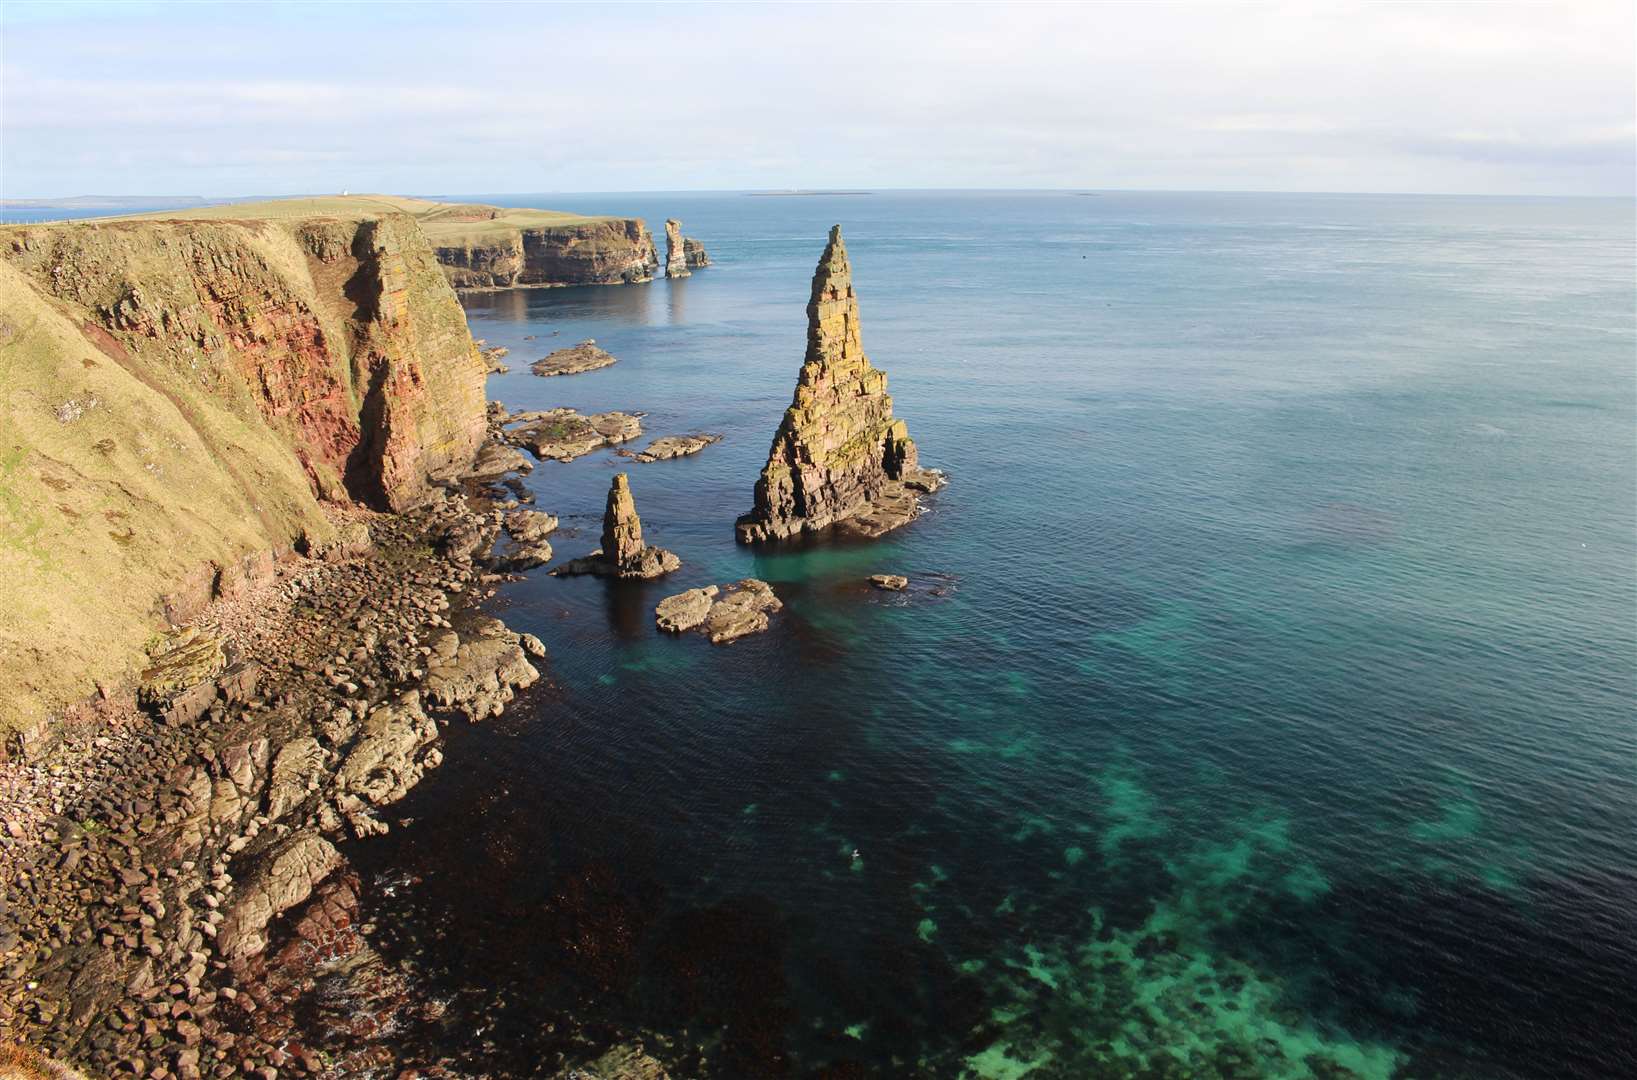 Duncansby Head is seen as one of the main attractions of Caithness.